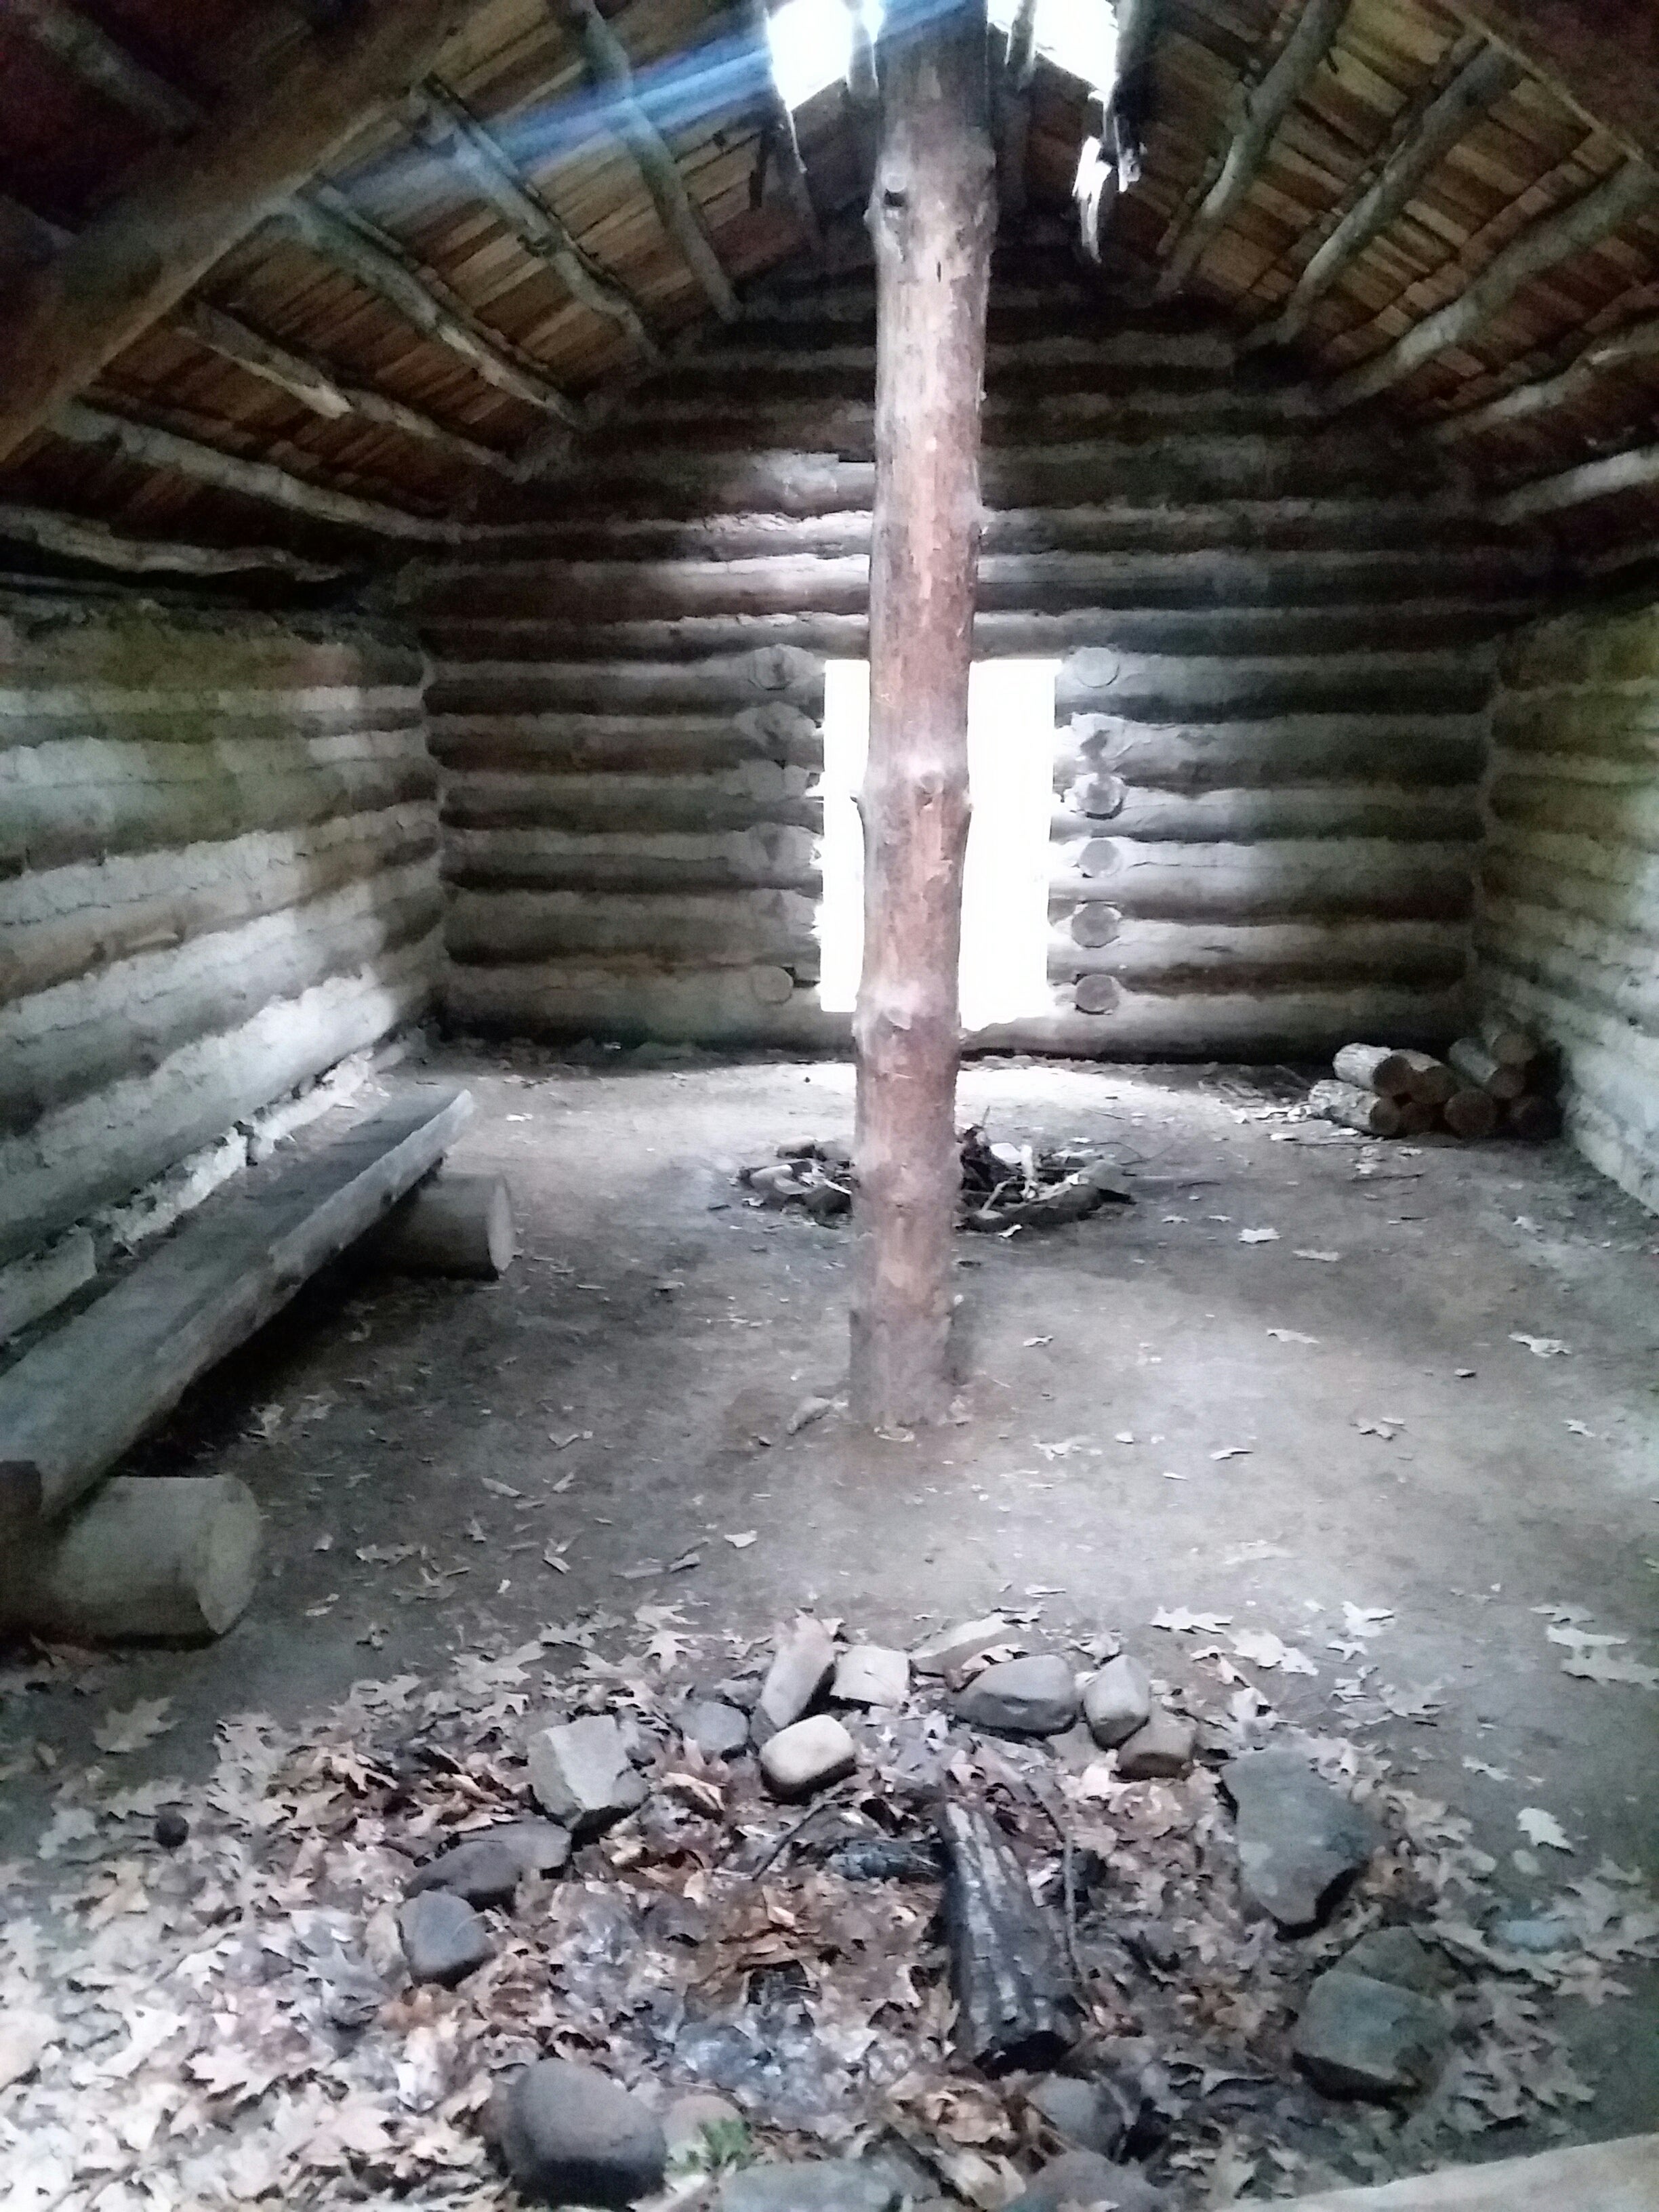 Inside one of the native village. These are used during living history events